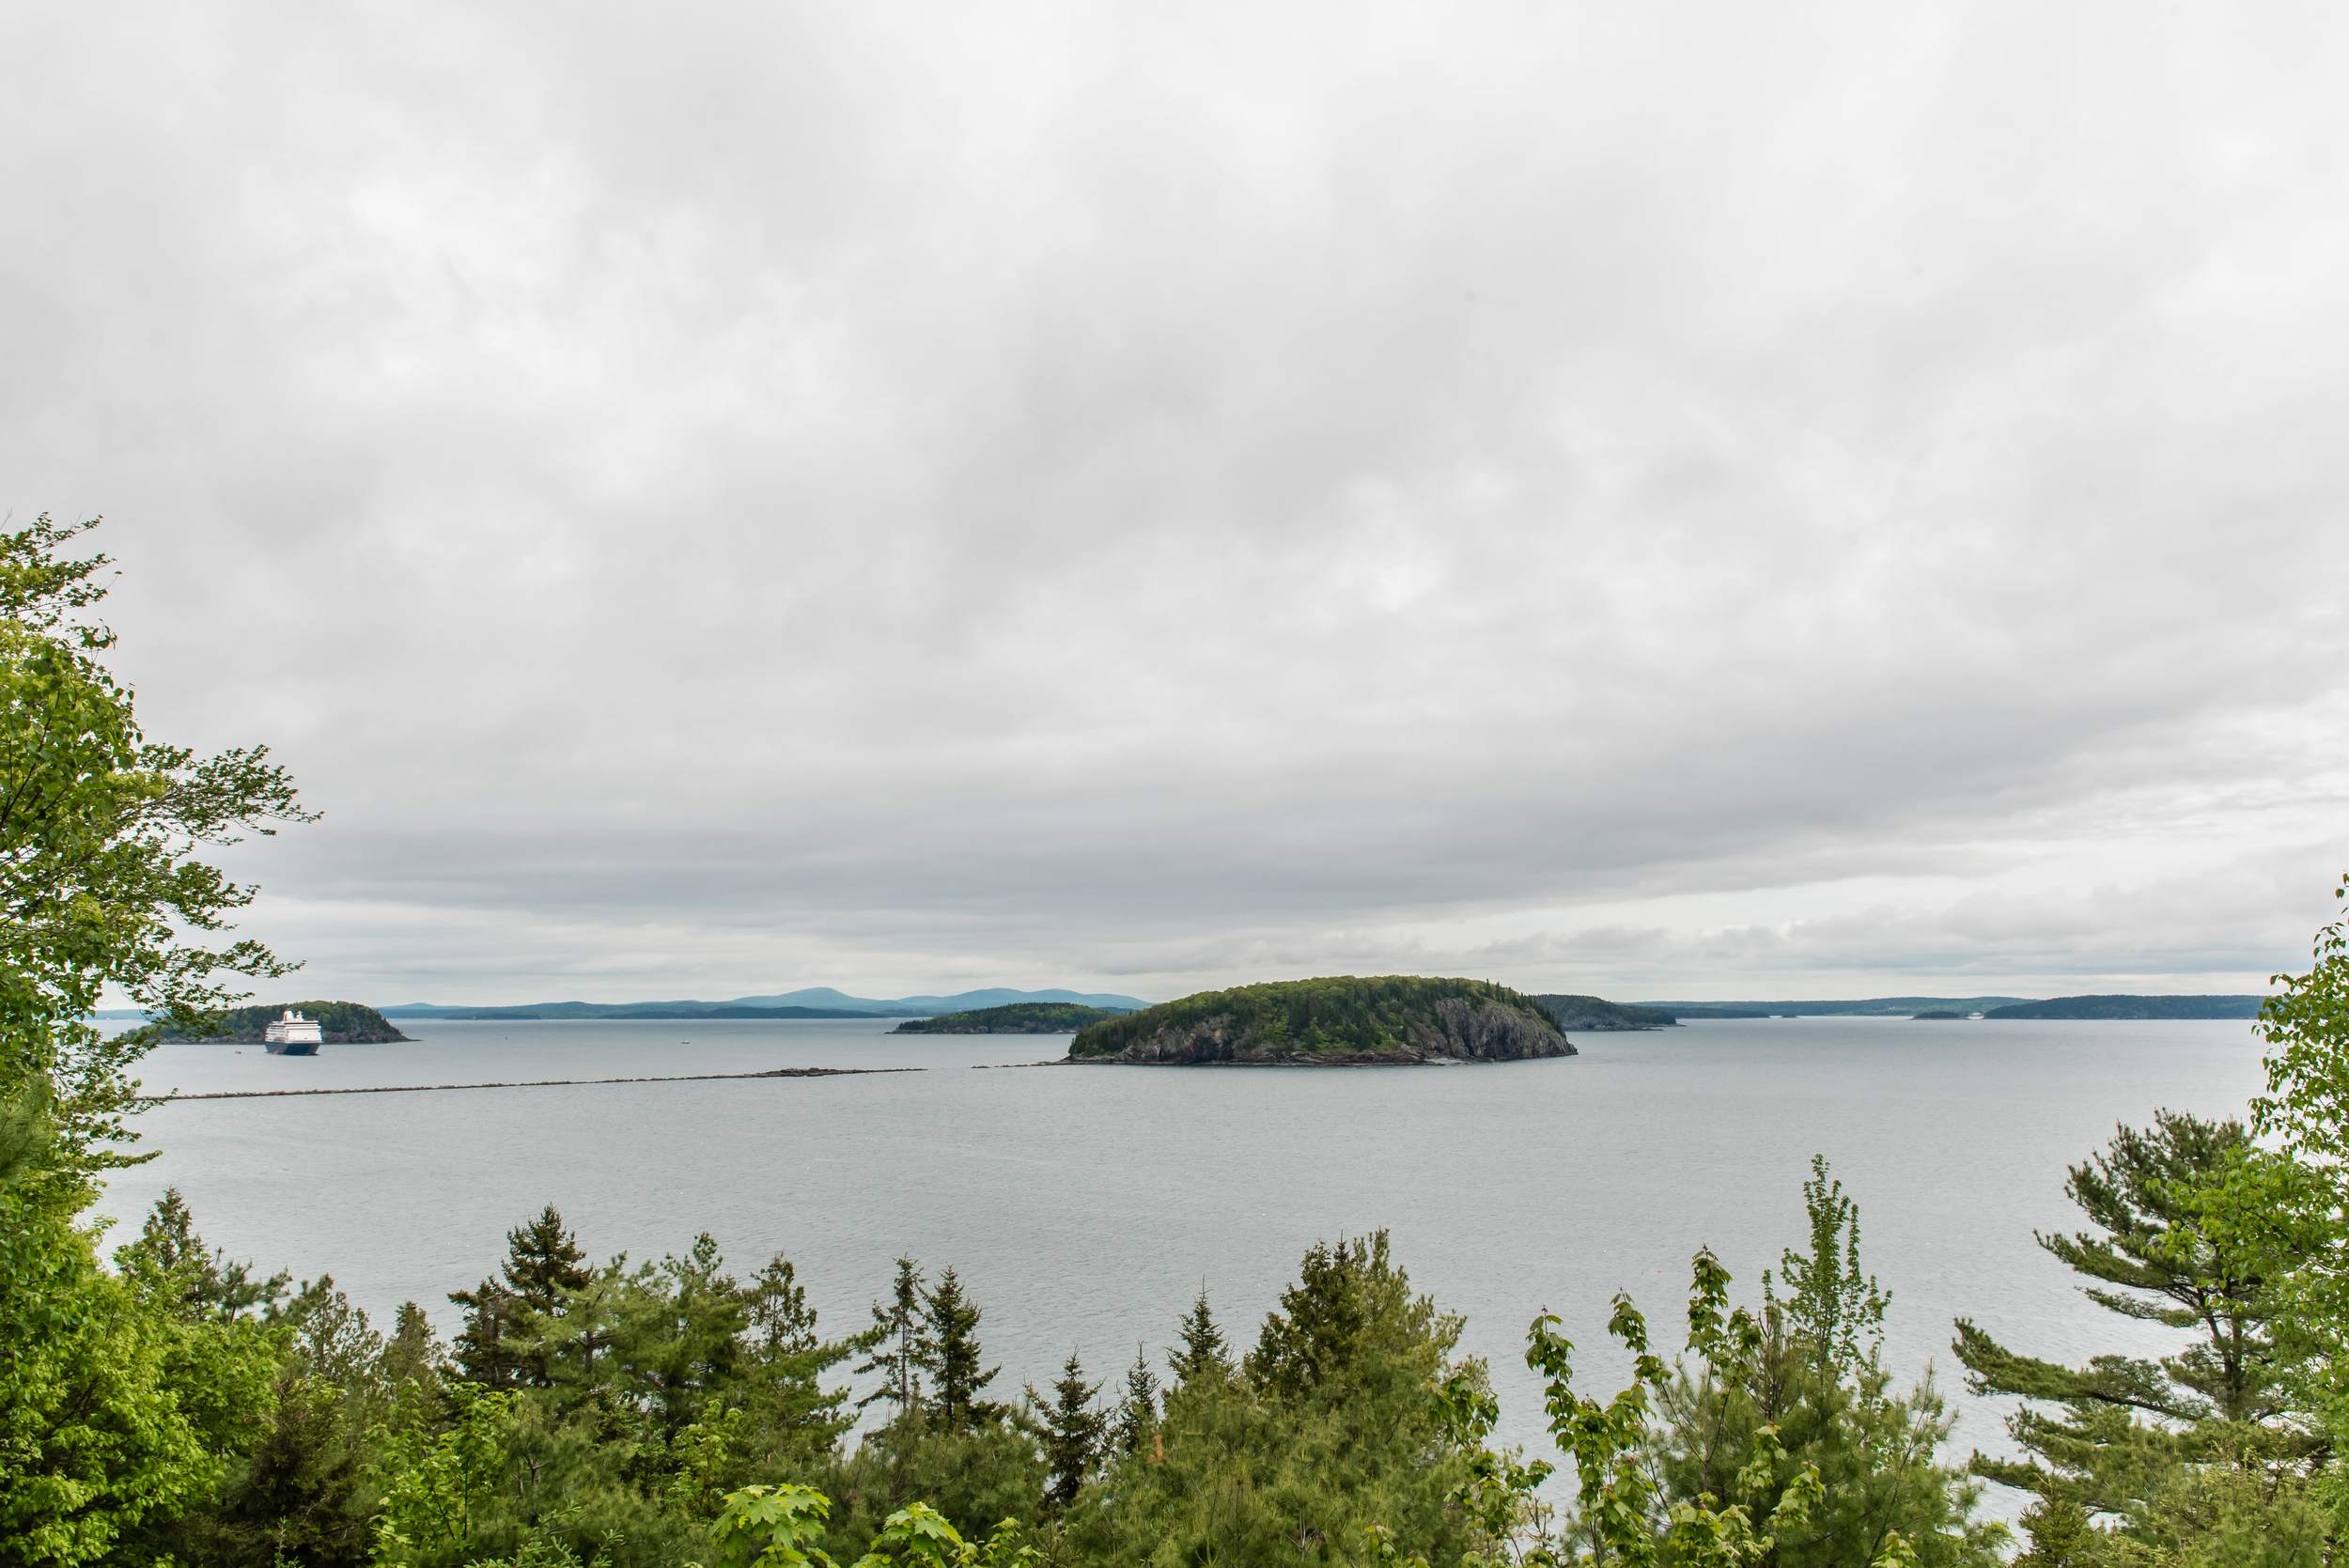  From the porch overlooking Frenchman's Bay and the Porcupine Islands. 